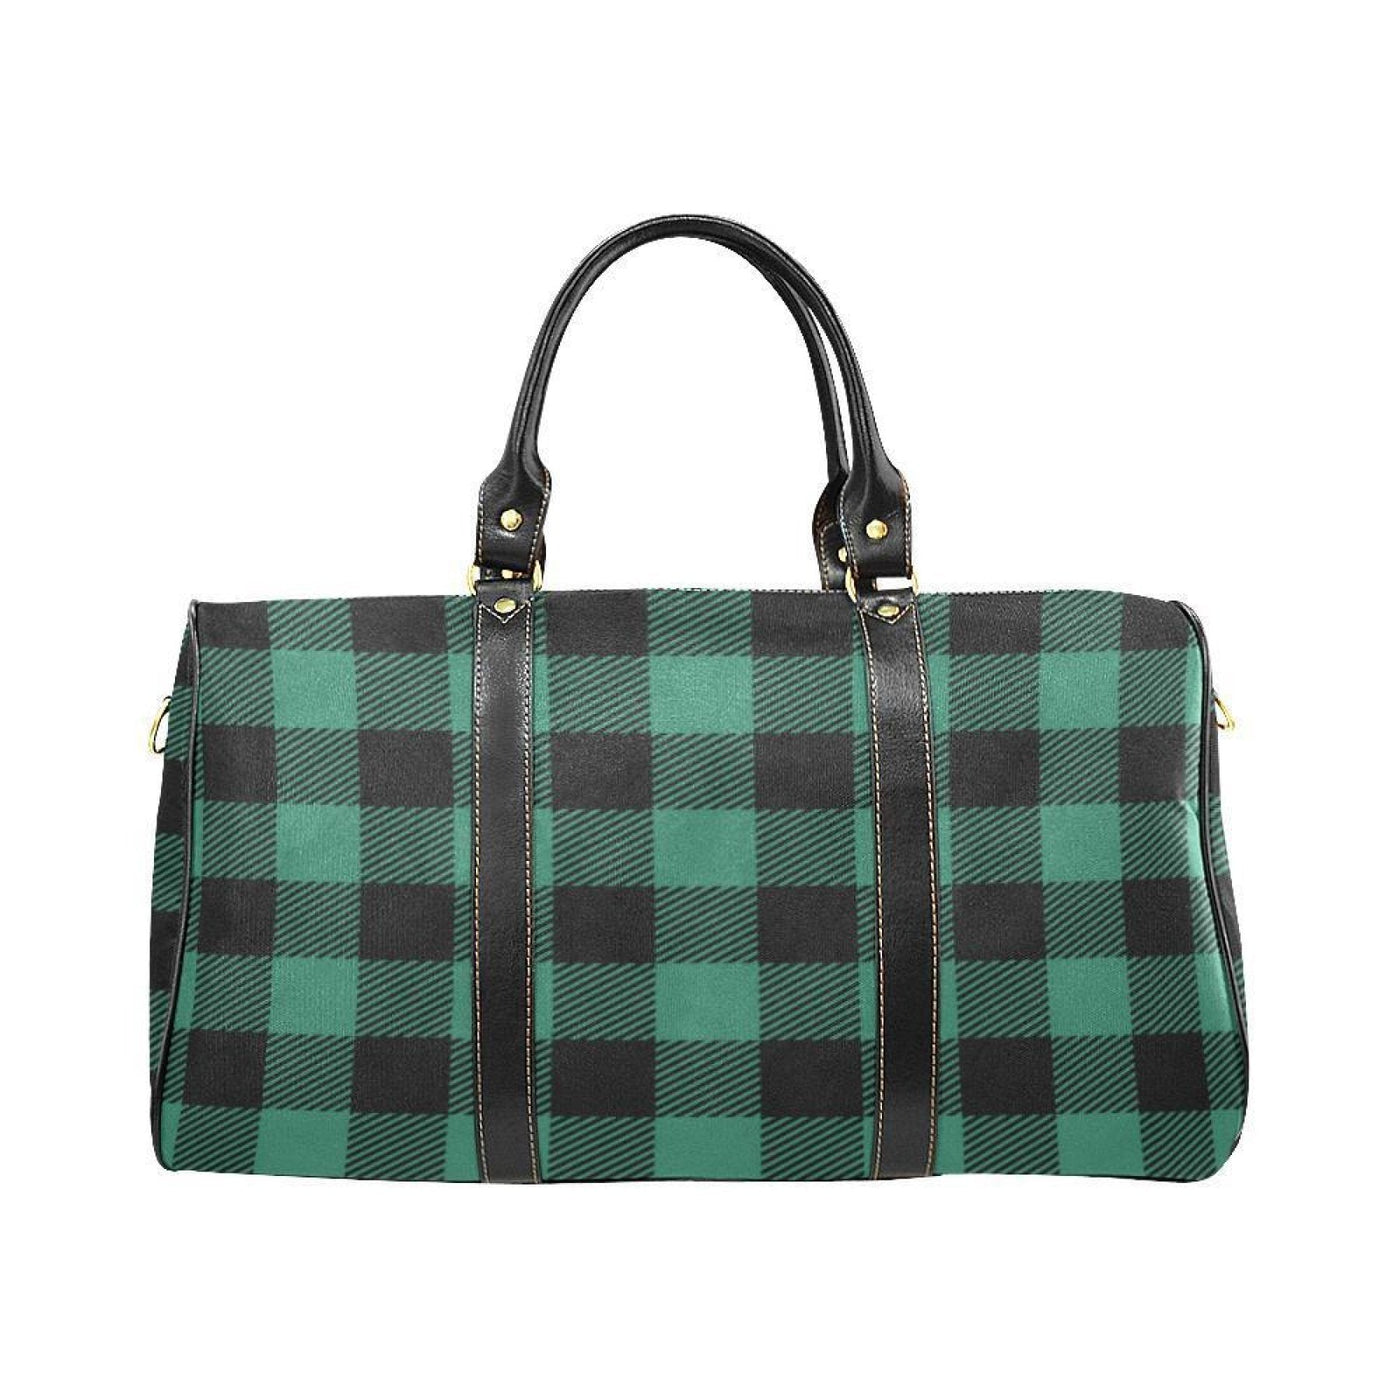 Travel Bag Leather Carry On Large Luggage Bag Green Plaid - Bags | Travel Bags |